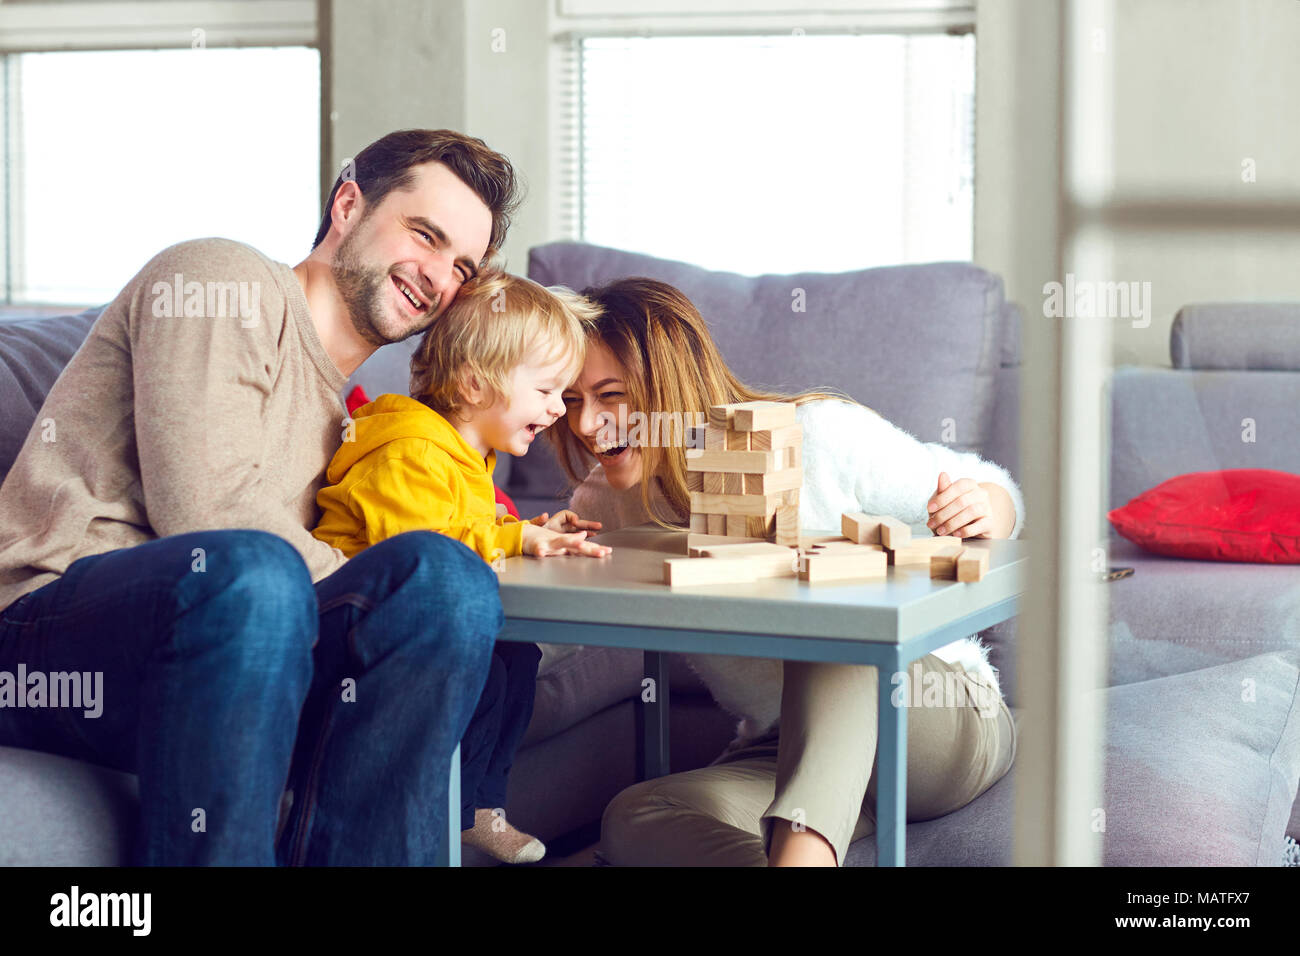 Happy family playing board games on the table. Stock Photo